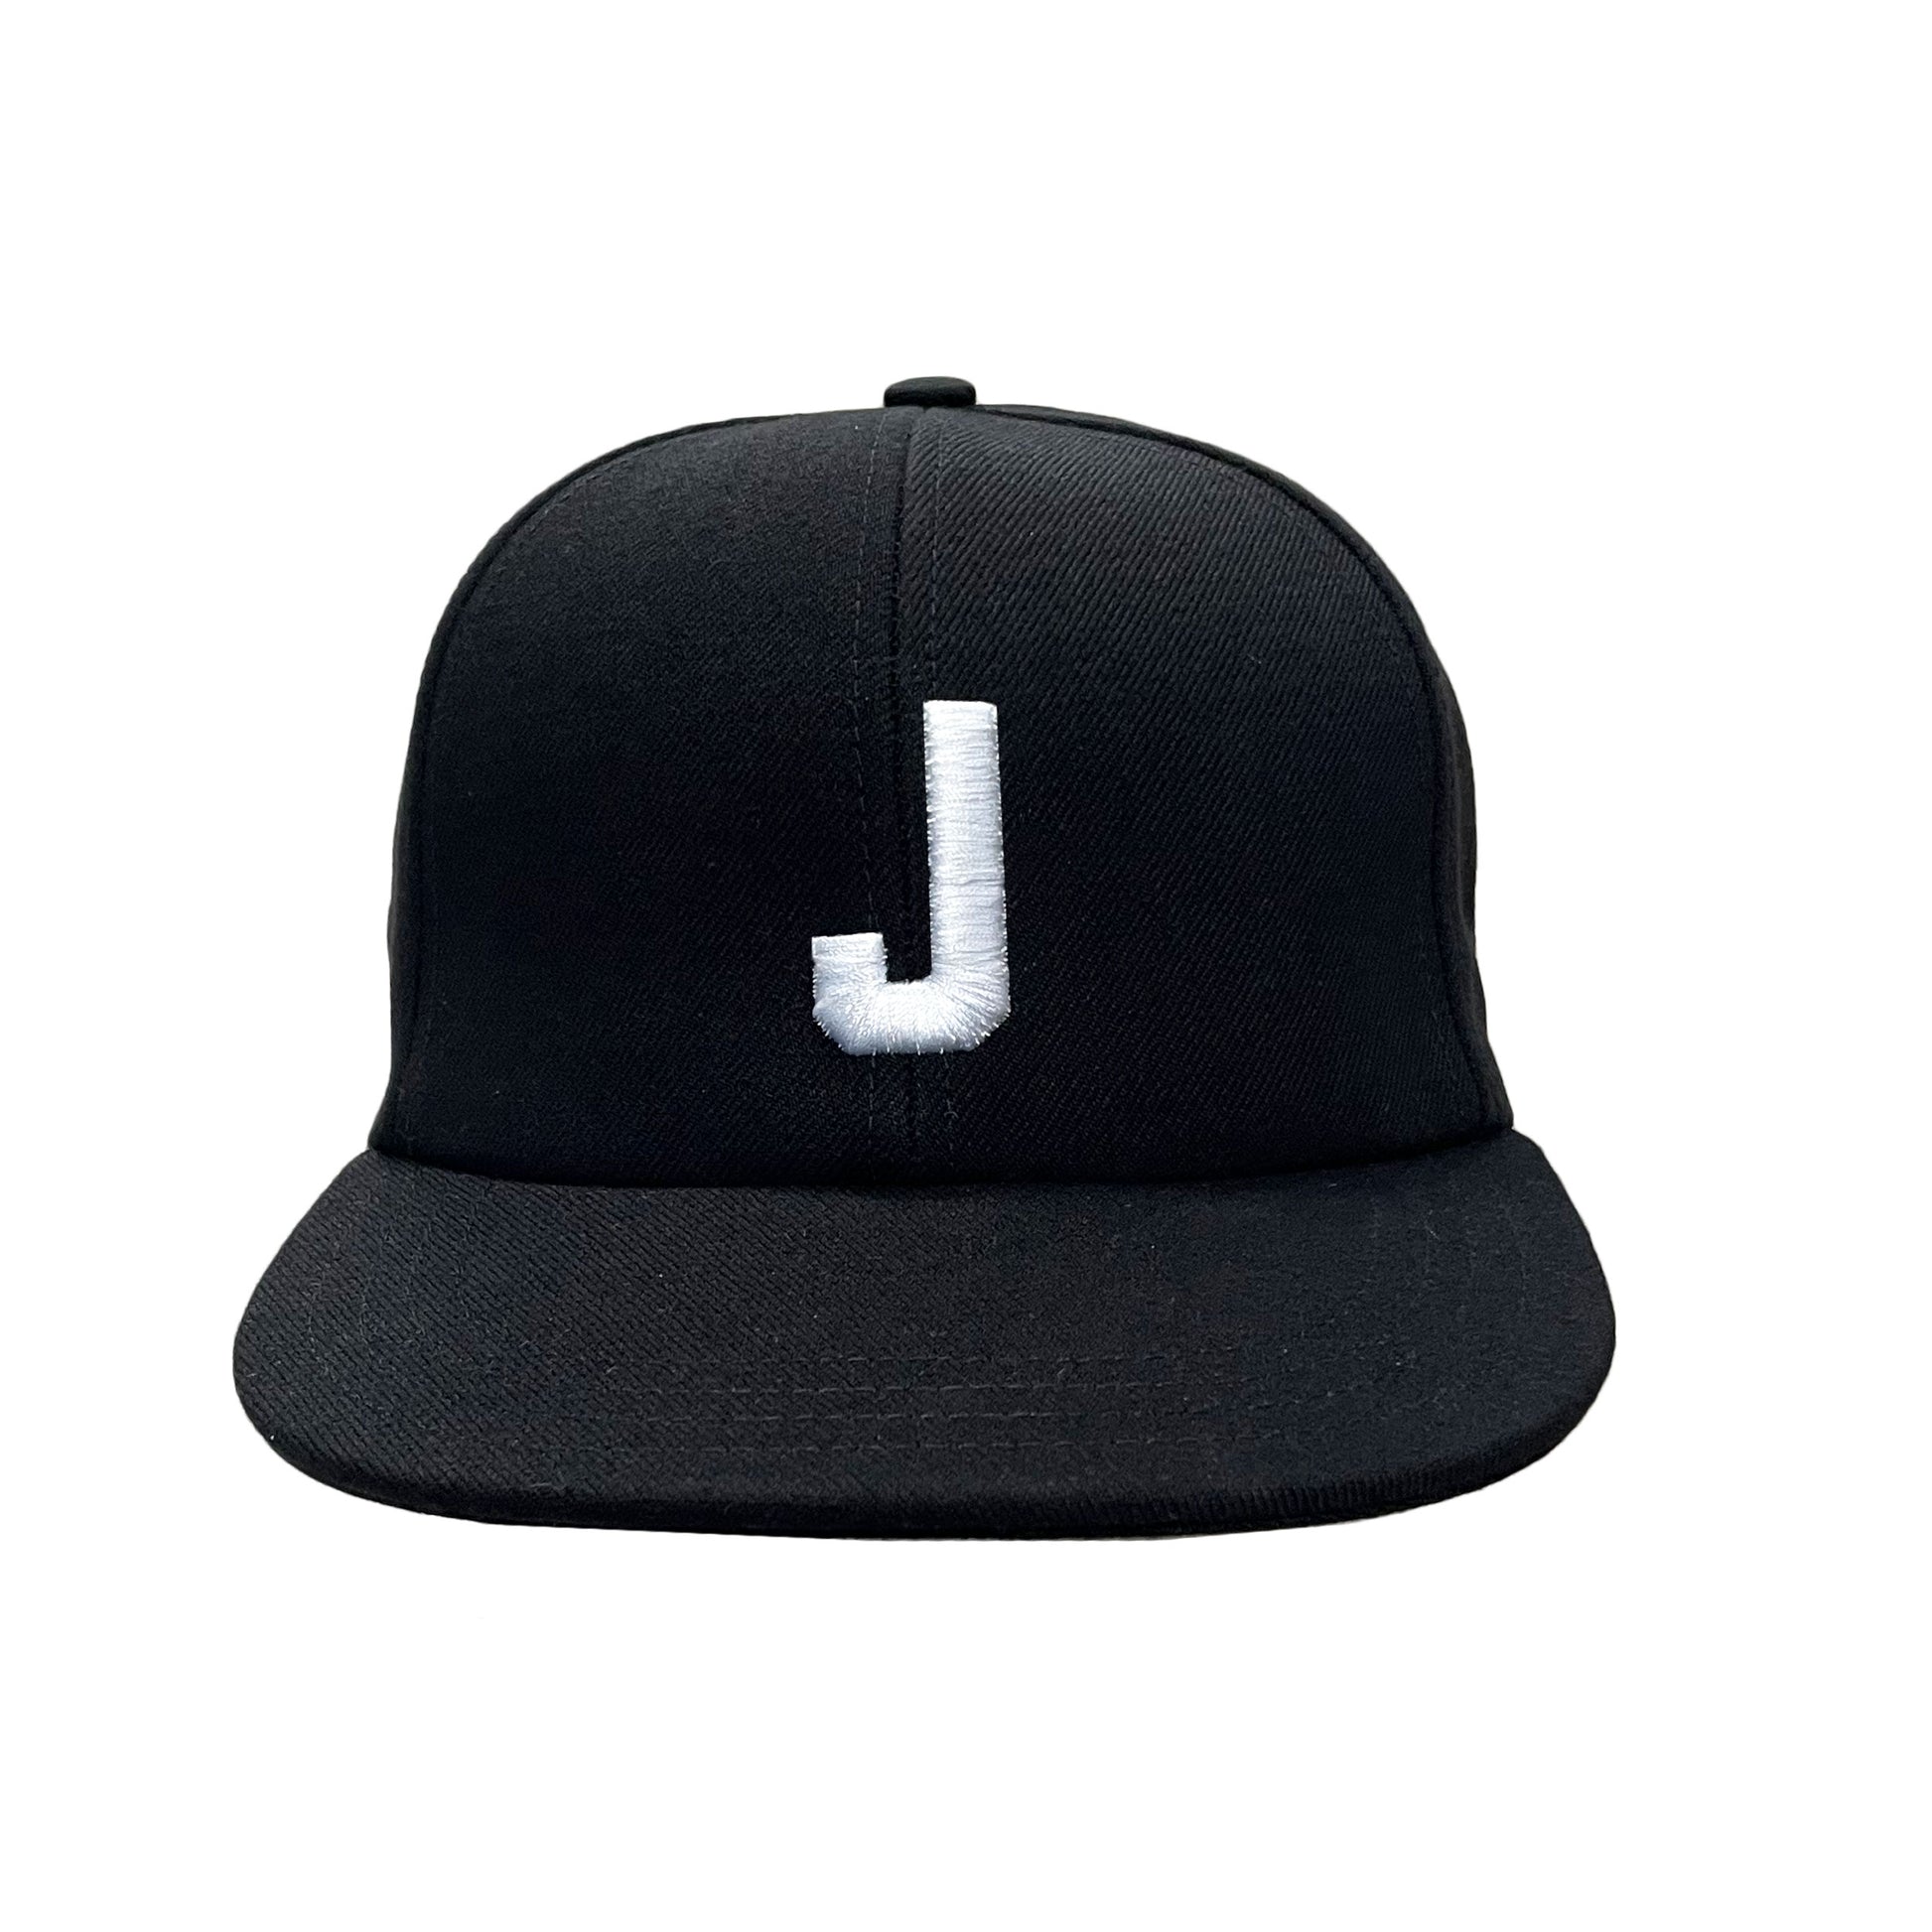 White embroidered J wool snapback hat